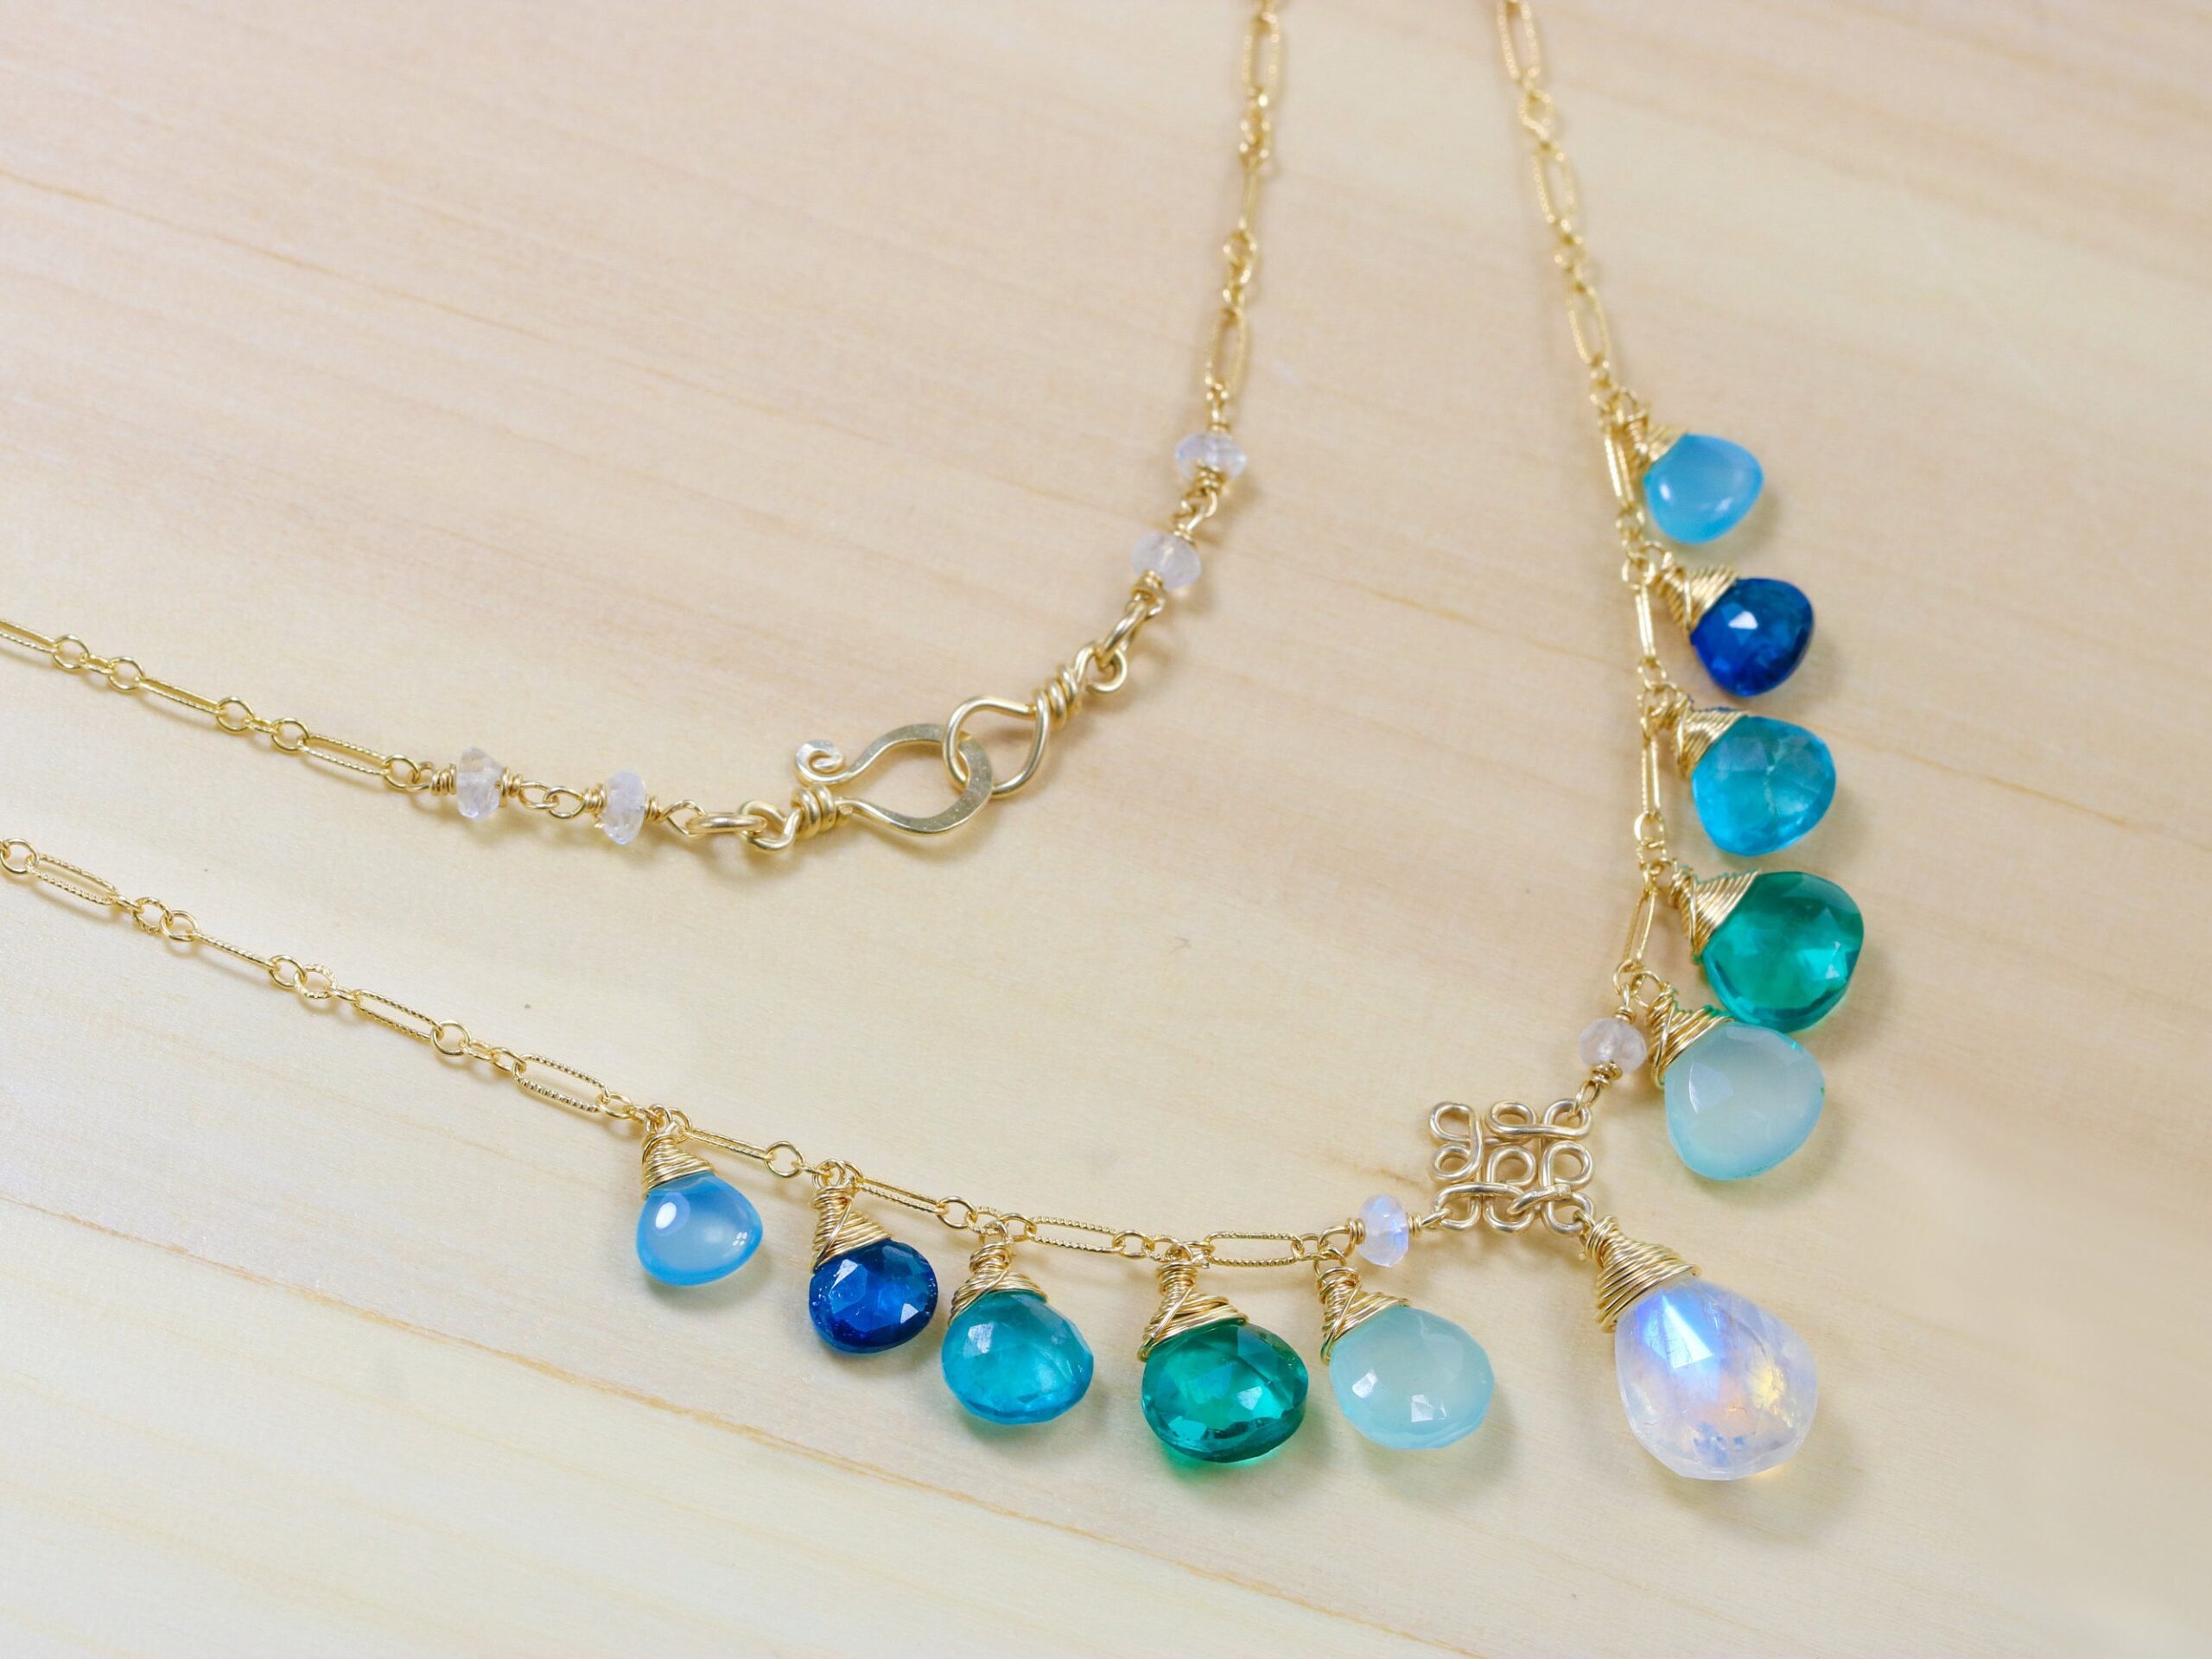 Solid Gold 14K Aqua Blue Gemstone Necklace with Rainbow Moonstone, Apatite and Chalcedony